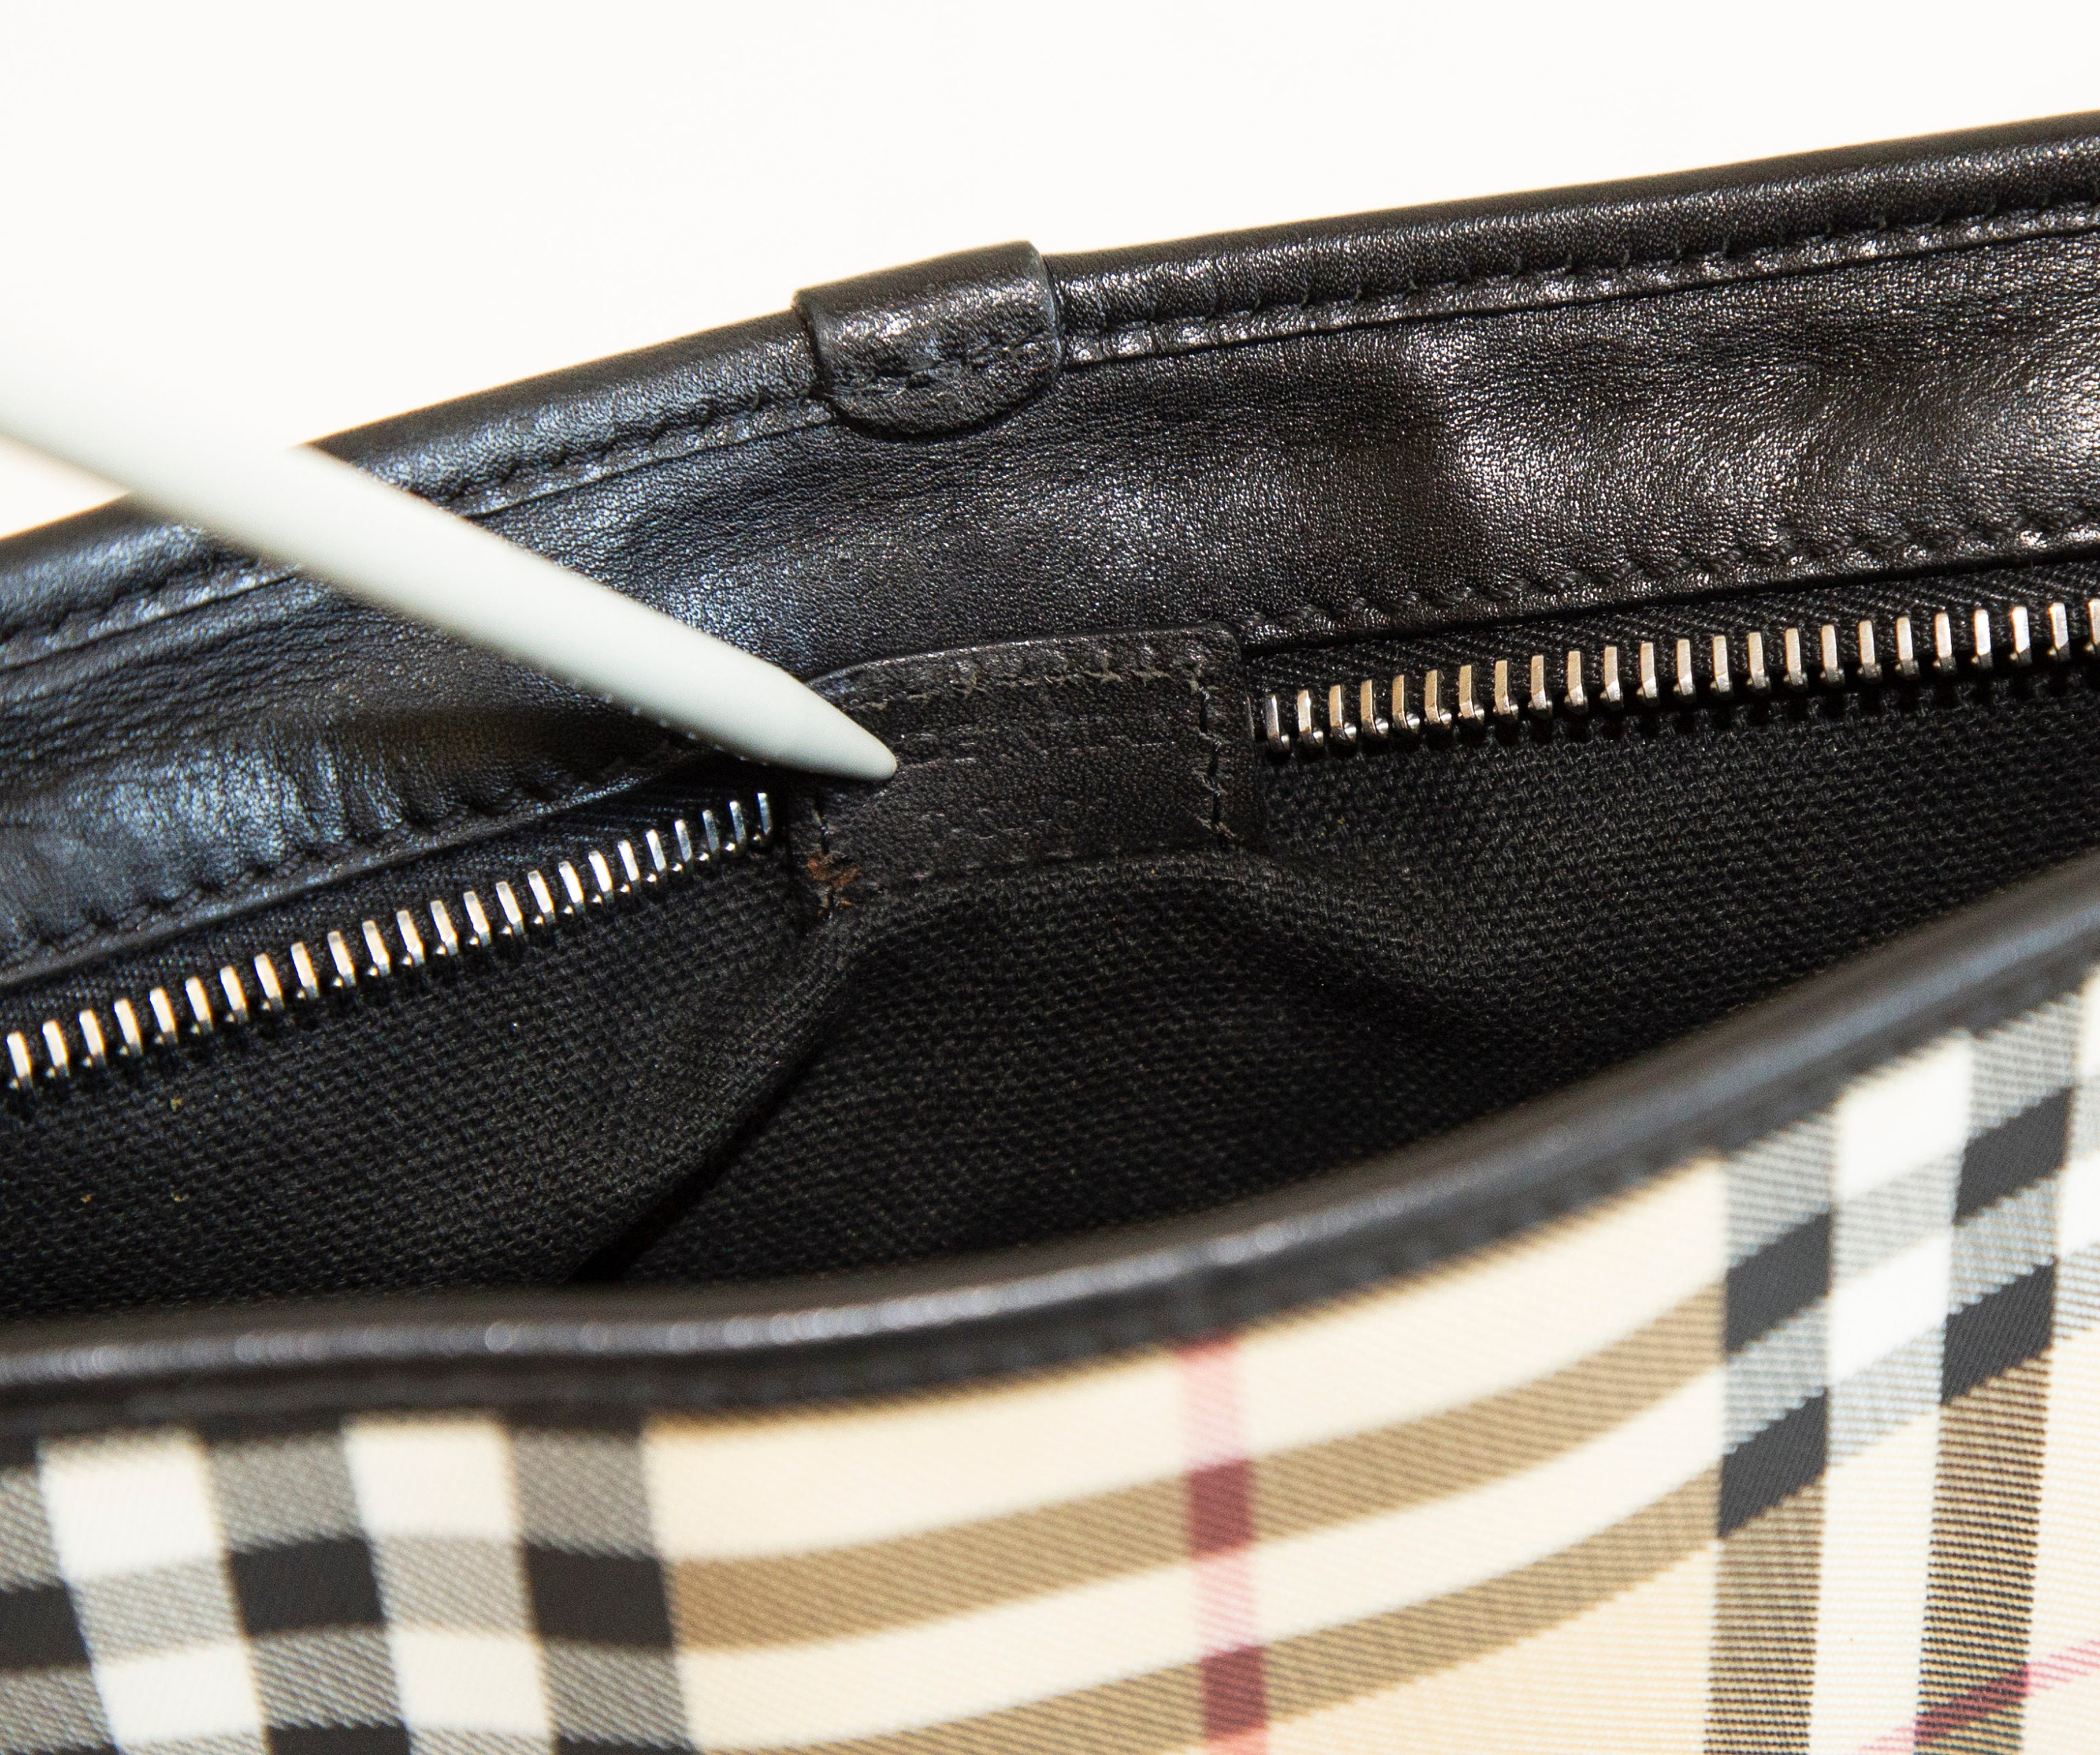 Burberry Classic Check With Black Leather Trim Shoulder Bag in -  Sweden